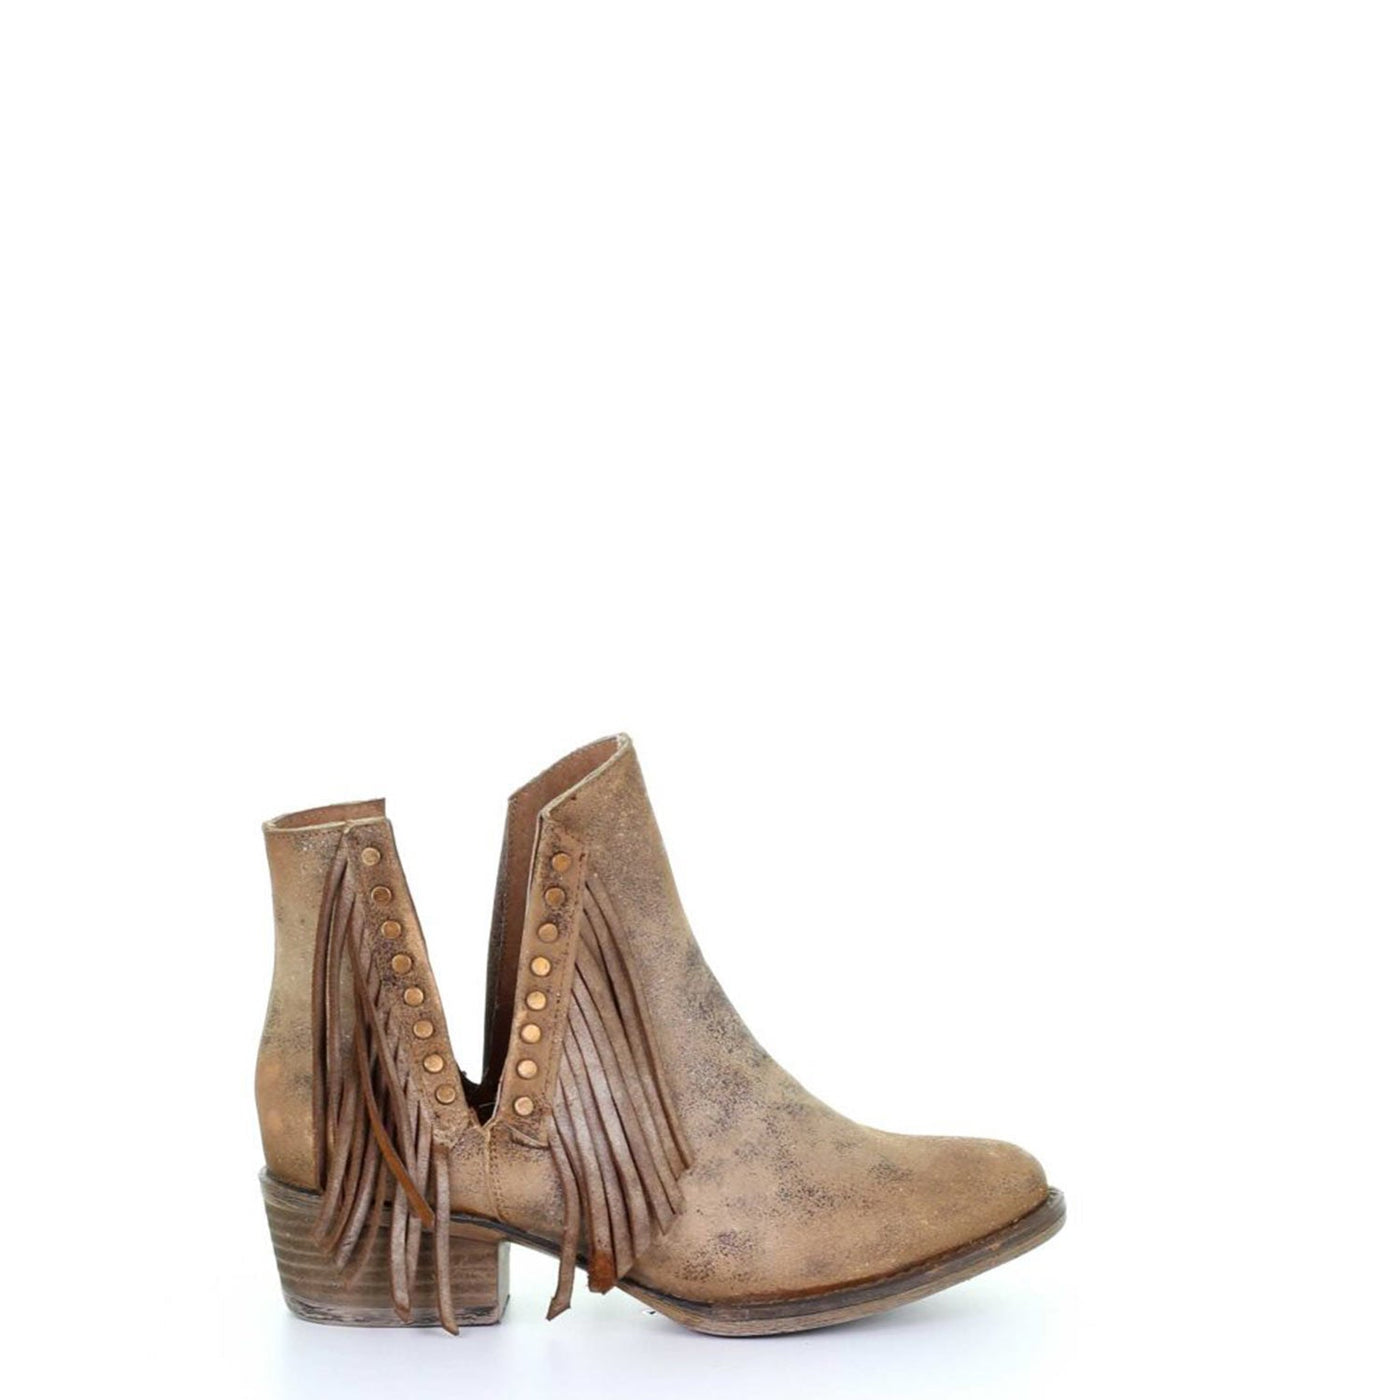 Circle G | Studs & Fringes Bootie Round Toe | Brown - Outback Traders Australia